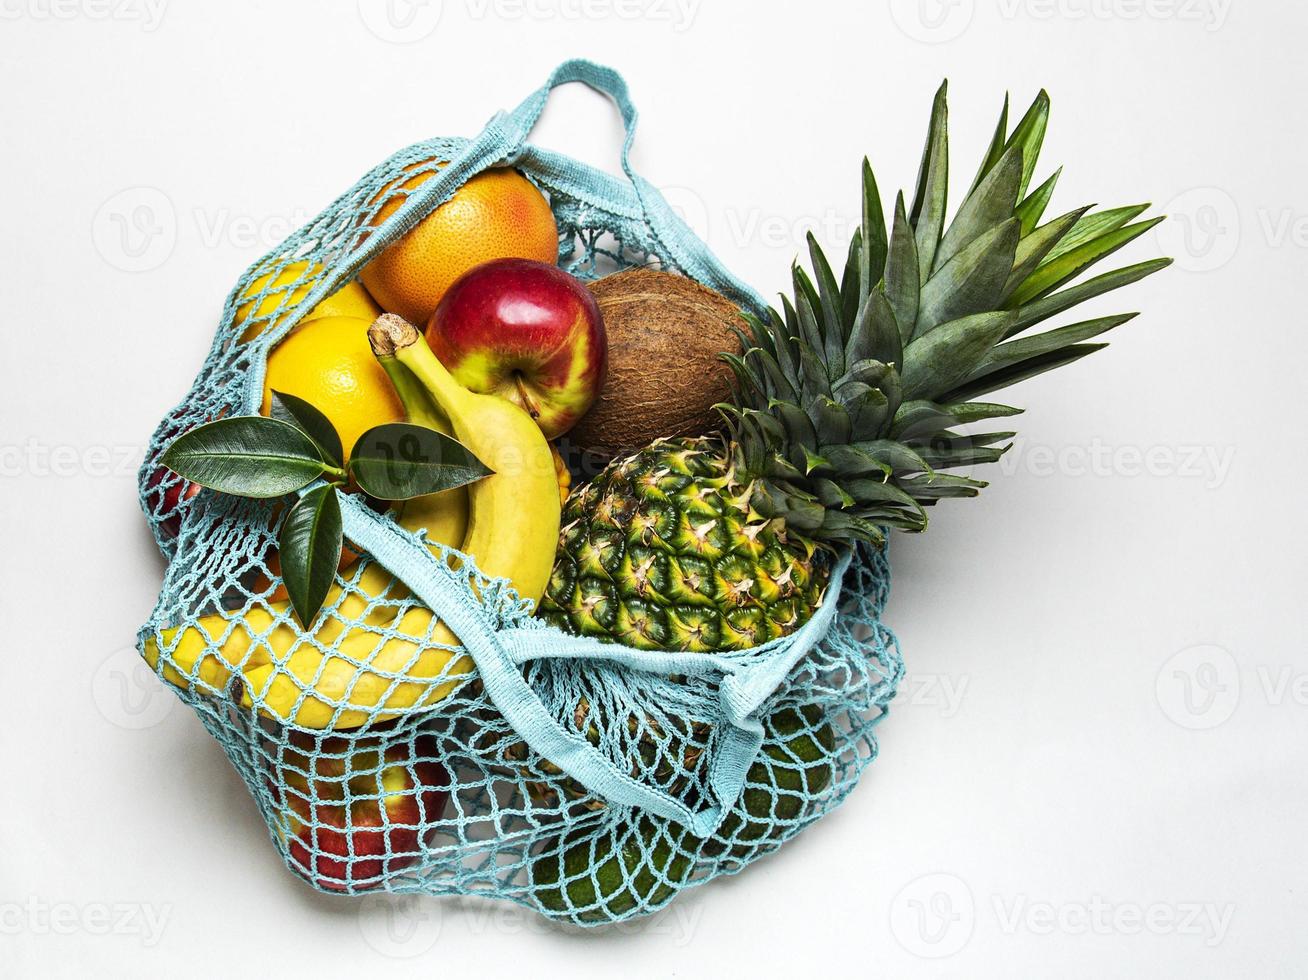 Mesh shopping bag with fruits photo